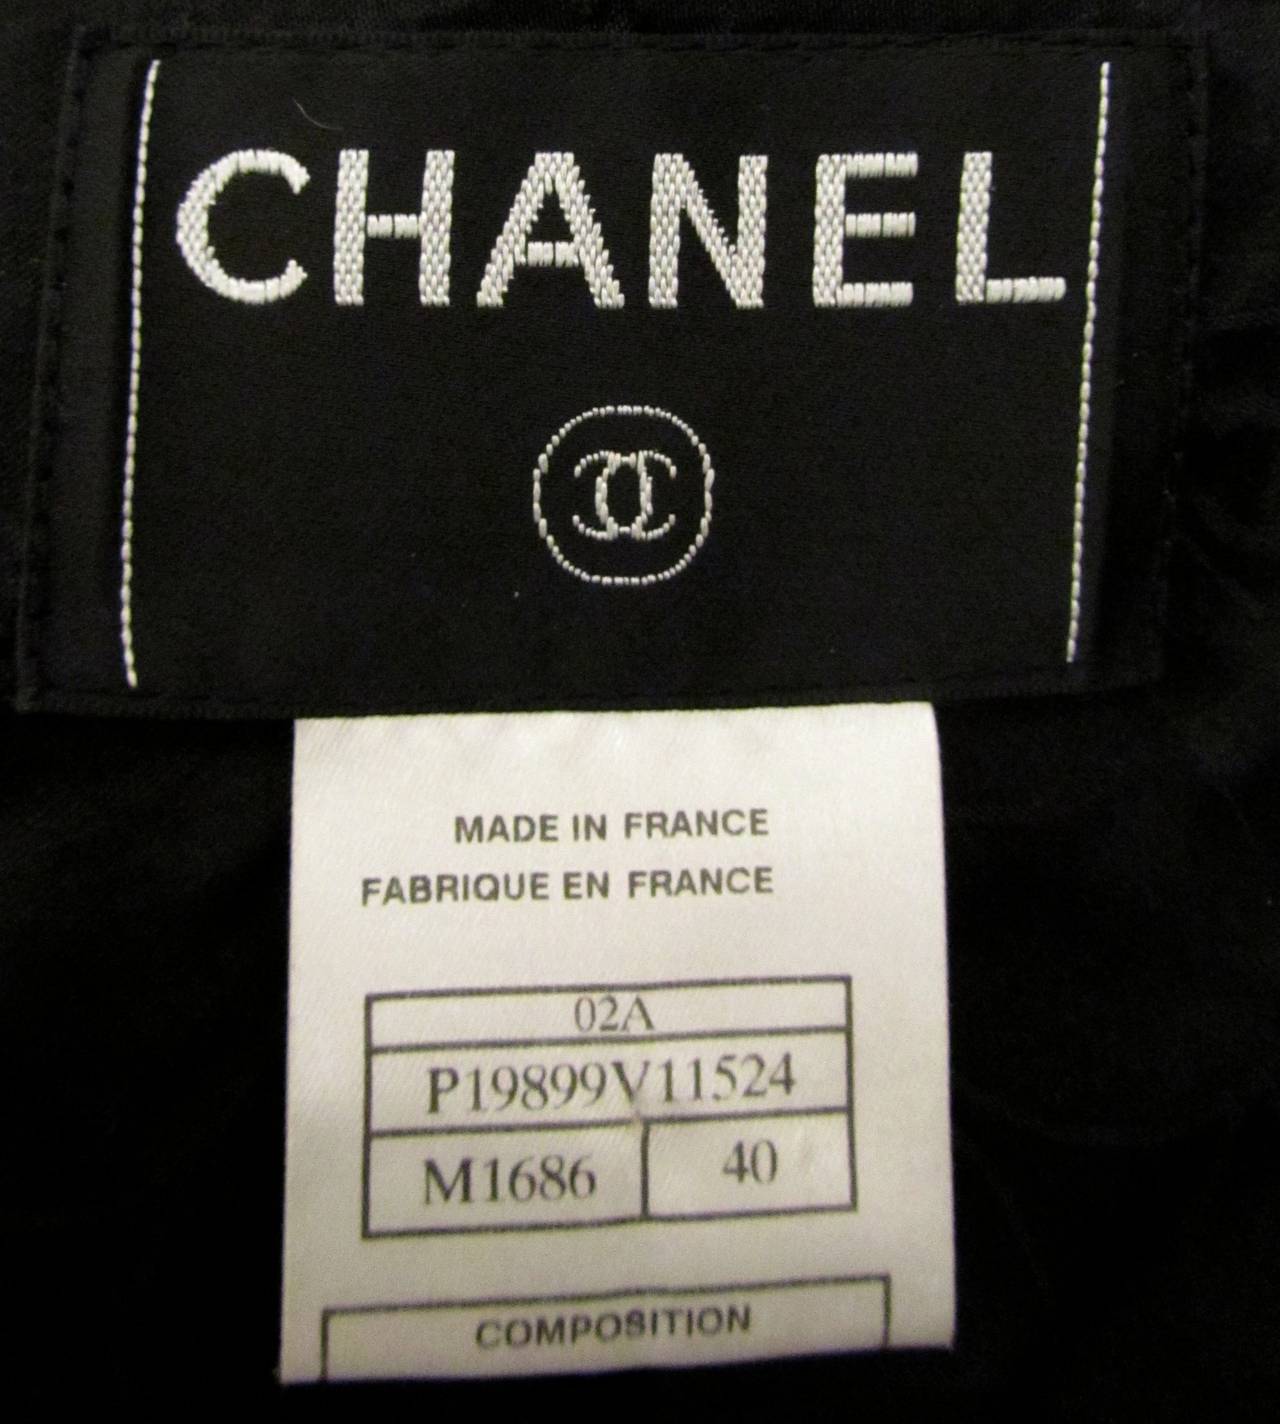 Chanel Winter Coat - Leather and Fur Trim 5